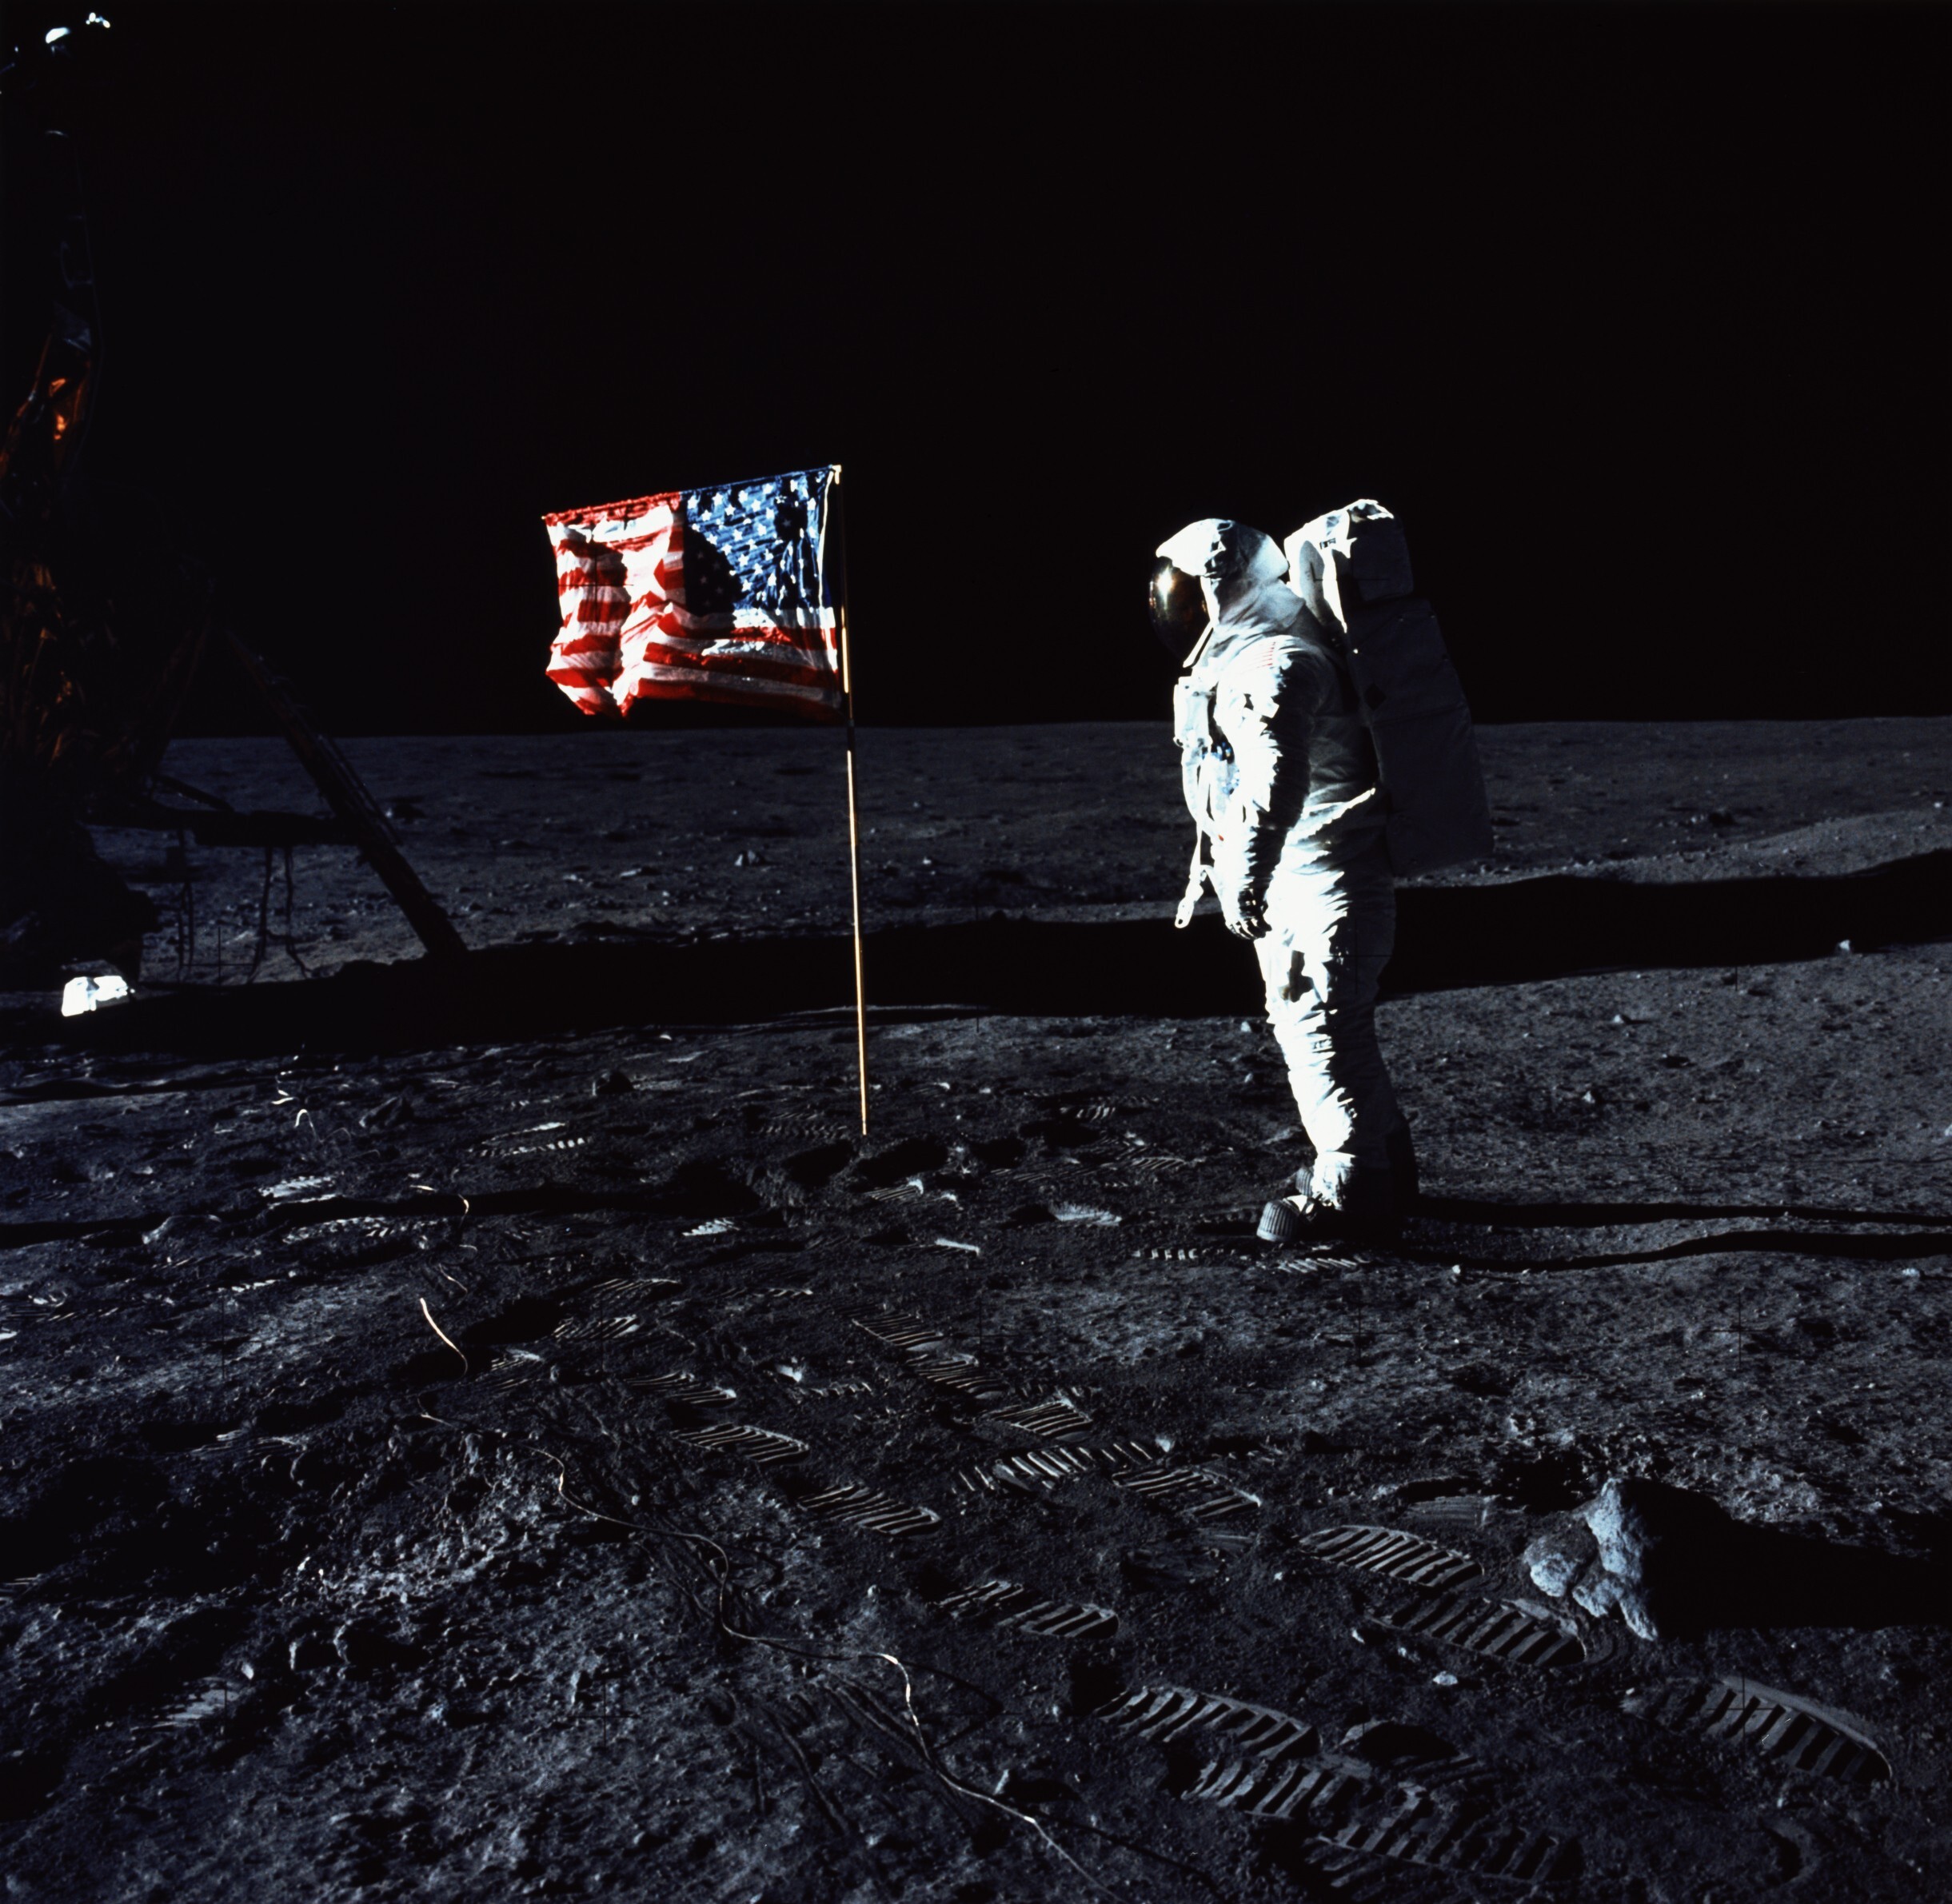 Astronaut Buzz Aldrin stands by the American flag on the surface of the moon on July 20, 1969. Photo: Getty Images